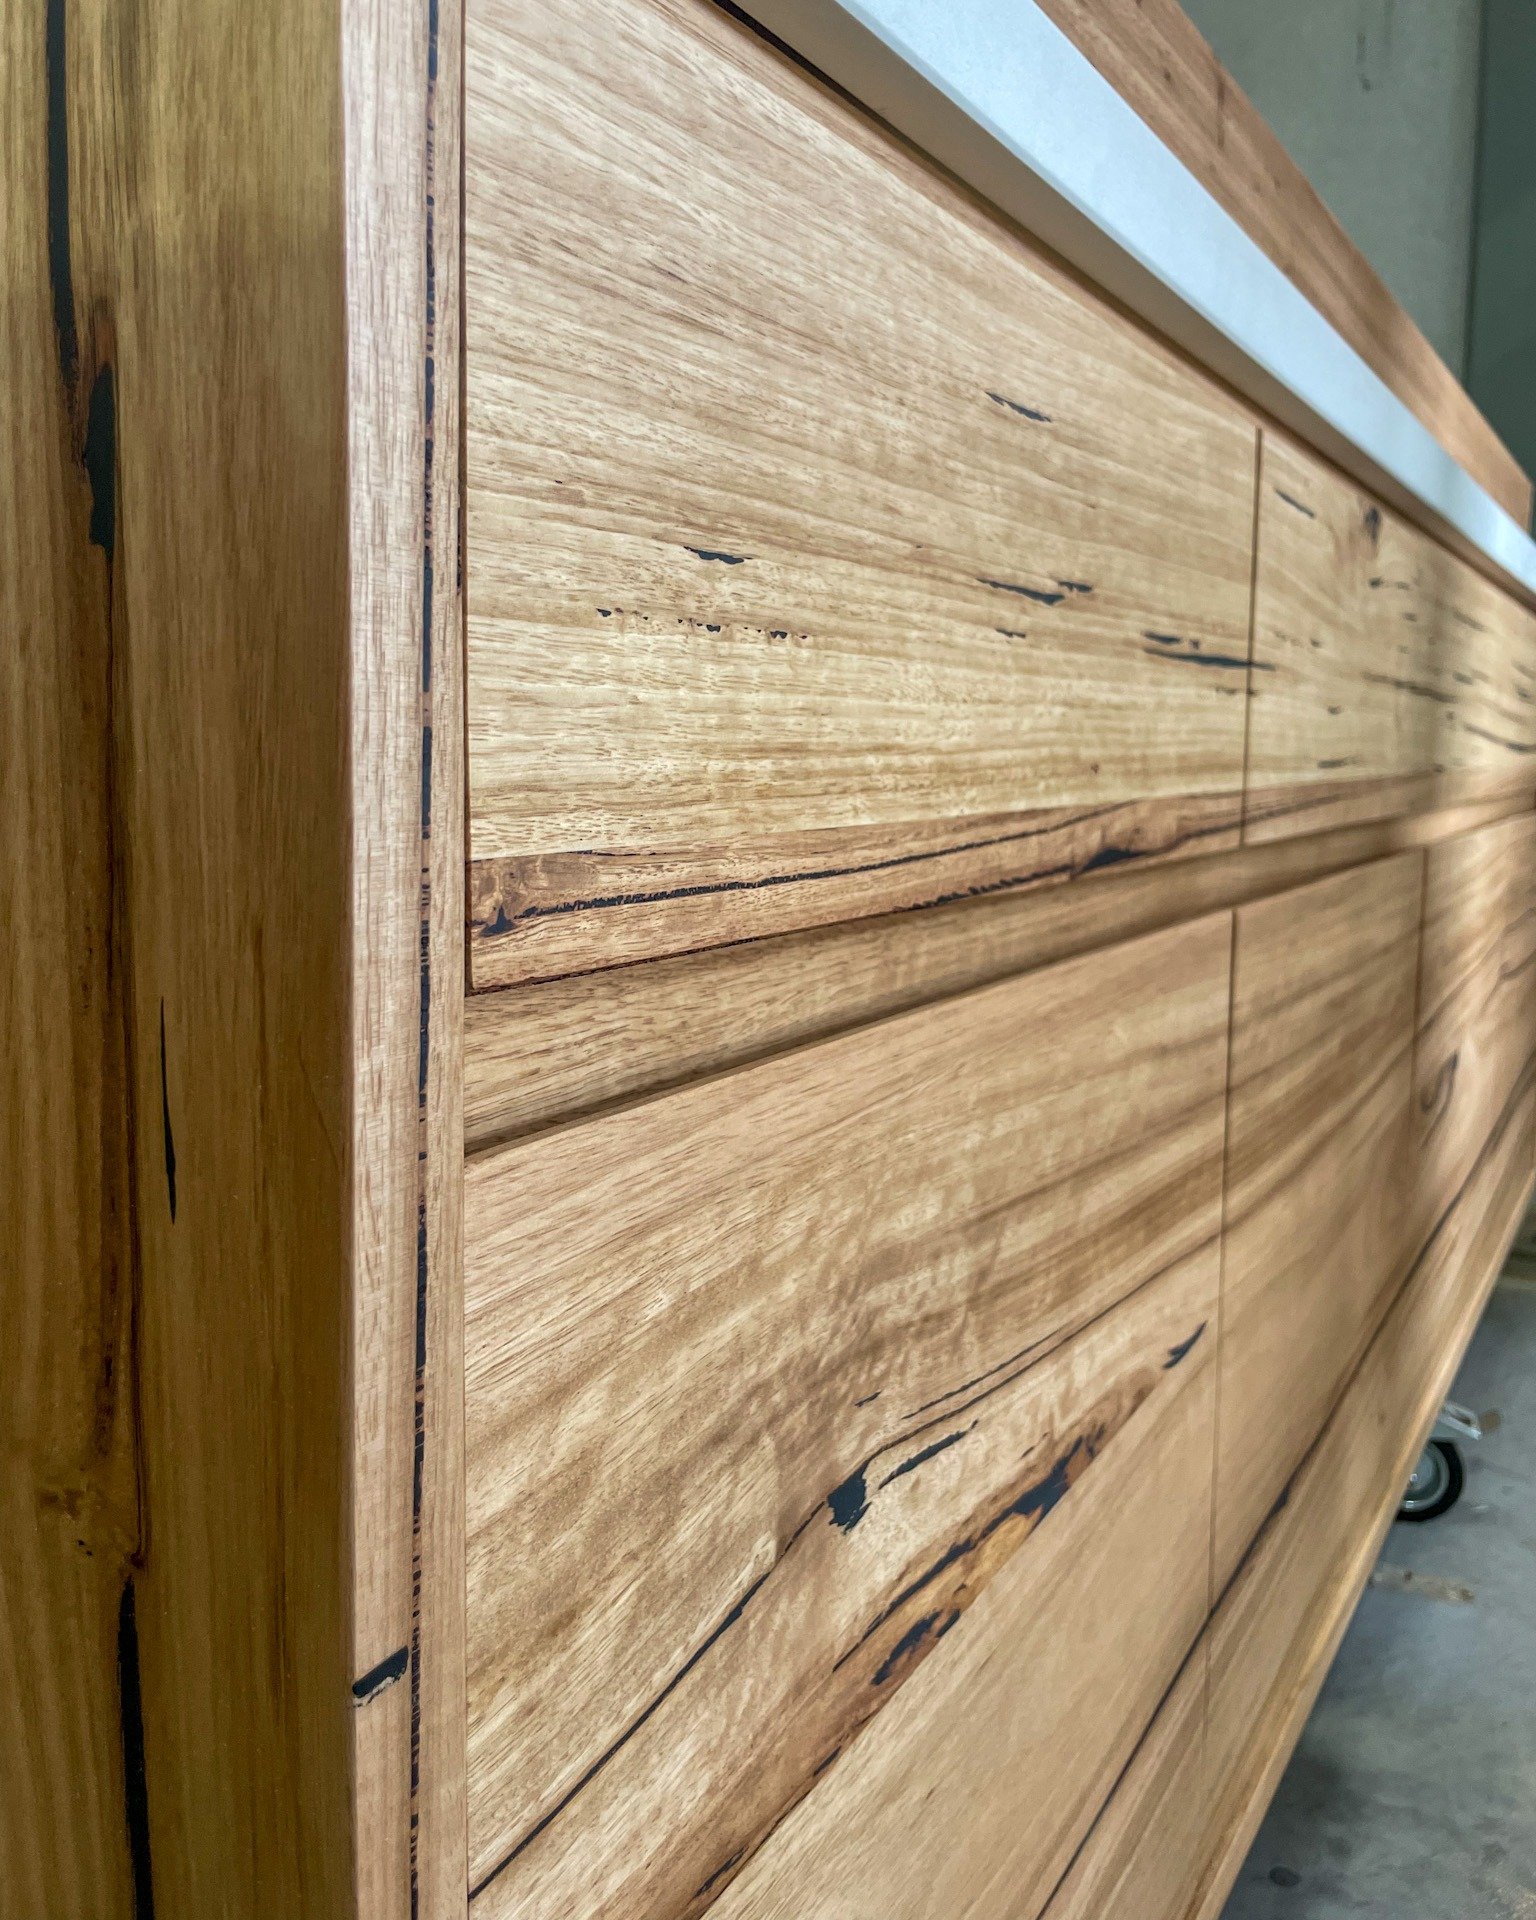 The subtle grain pattern and sap lines of Wormy Chestnut timber drawer the eye across the face of this custom Iluka vanity. This is a great timber for those who want just a little bit of feature in their vanity!

#ilukavanity #wormychestnut